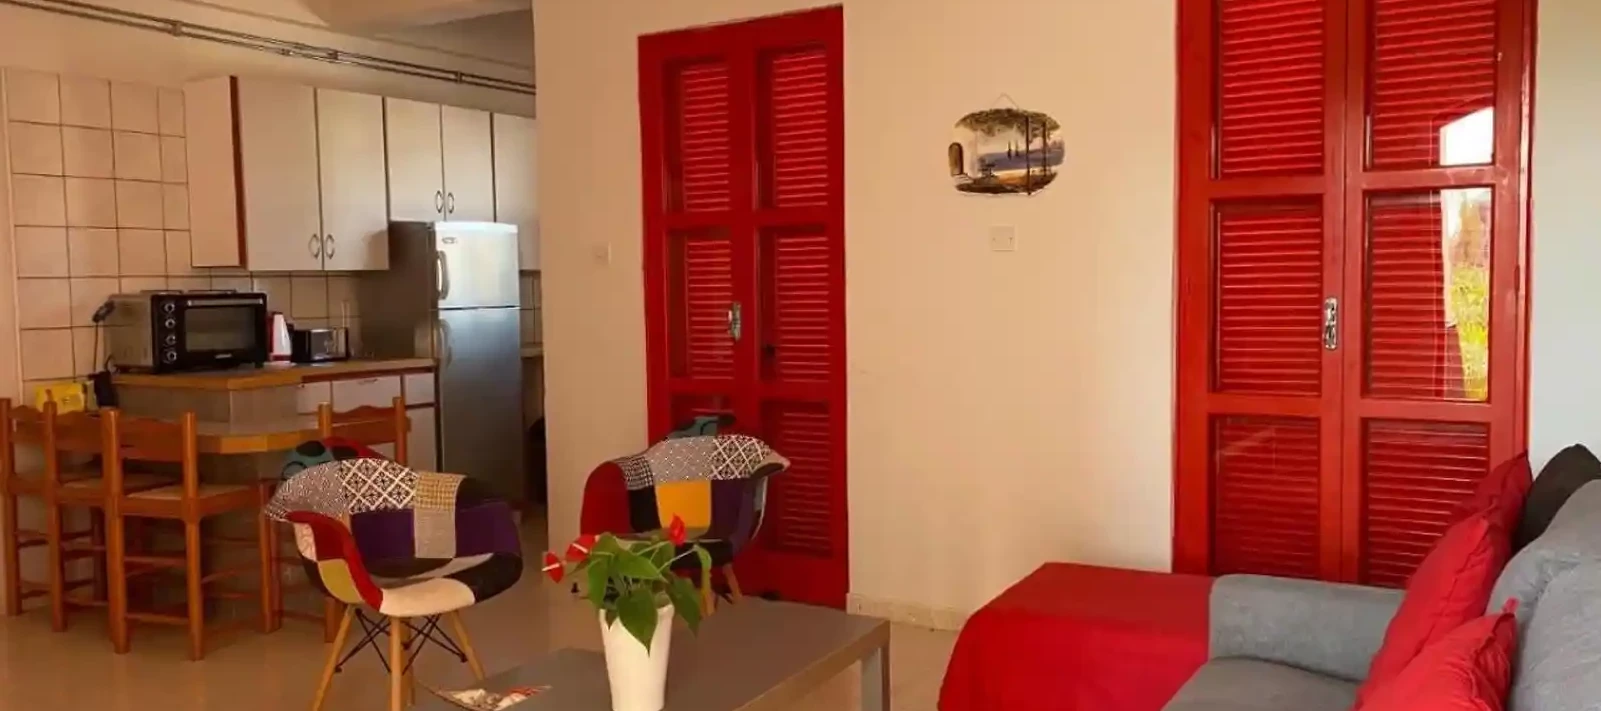 2-bedroom apartment fоr sаle €130.000, image 1